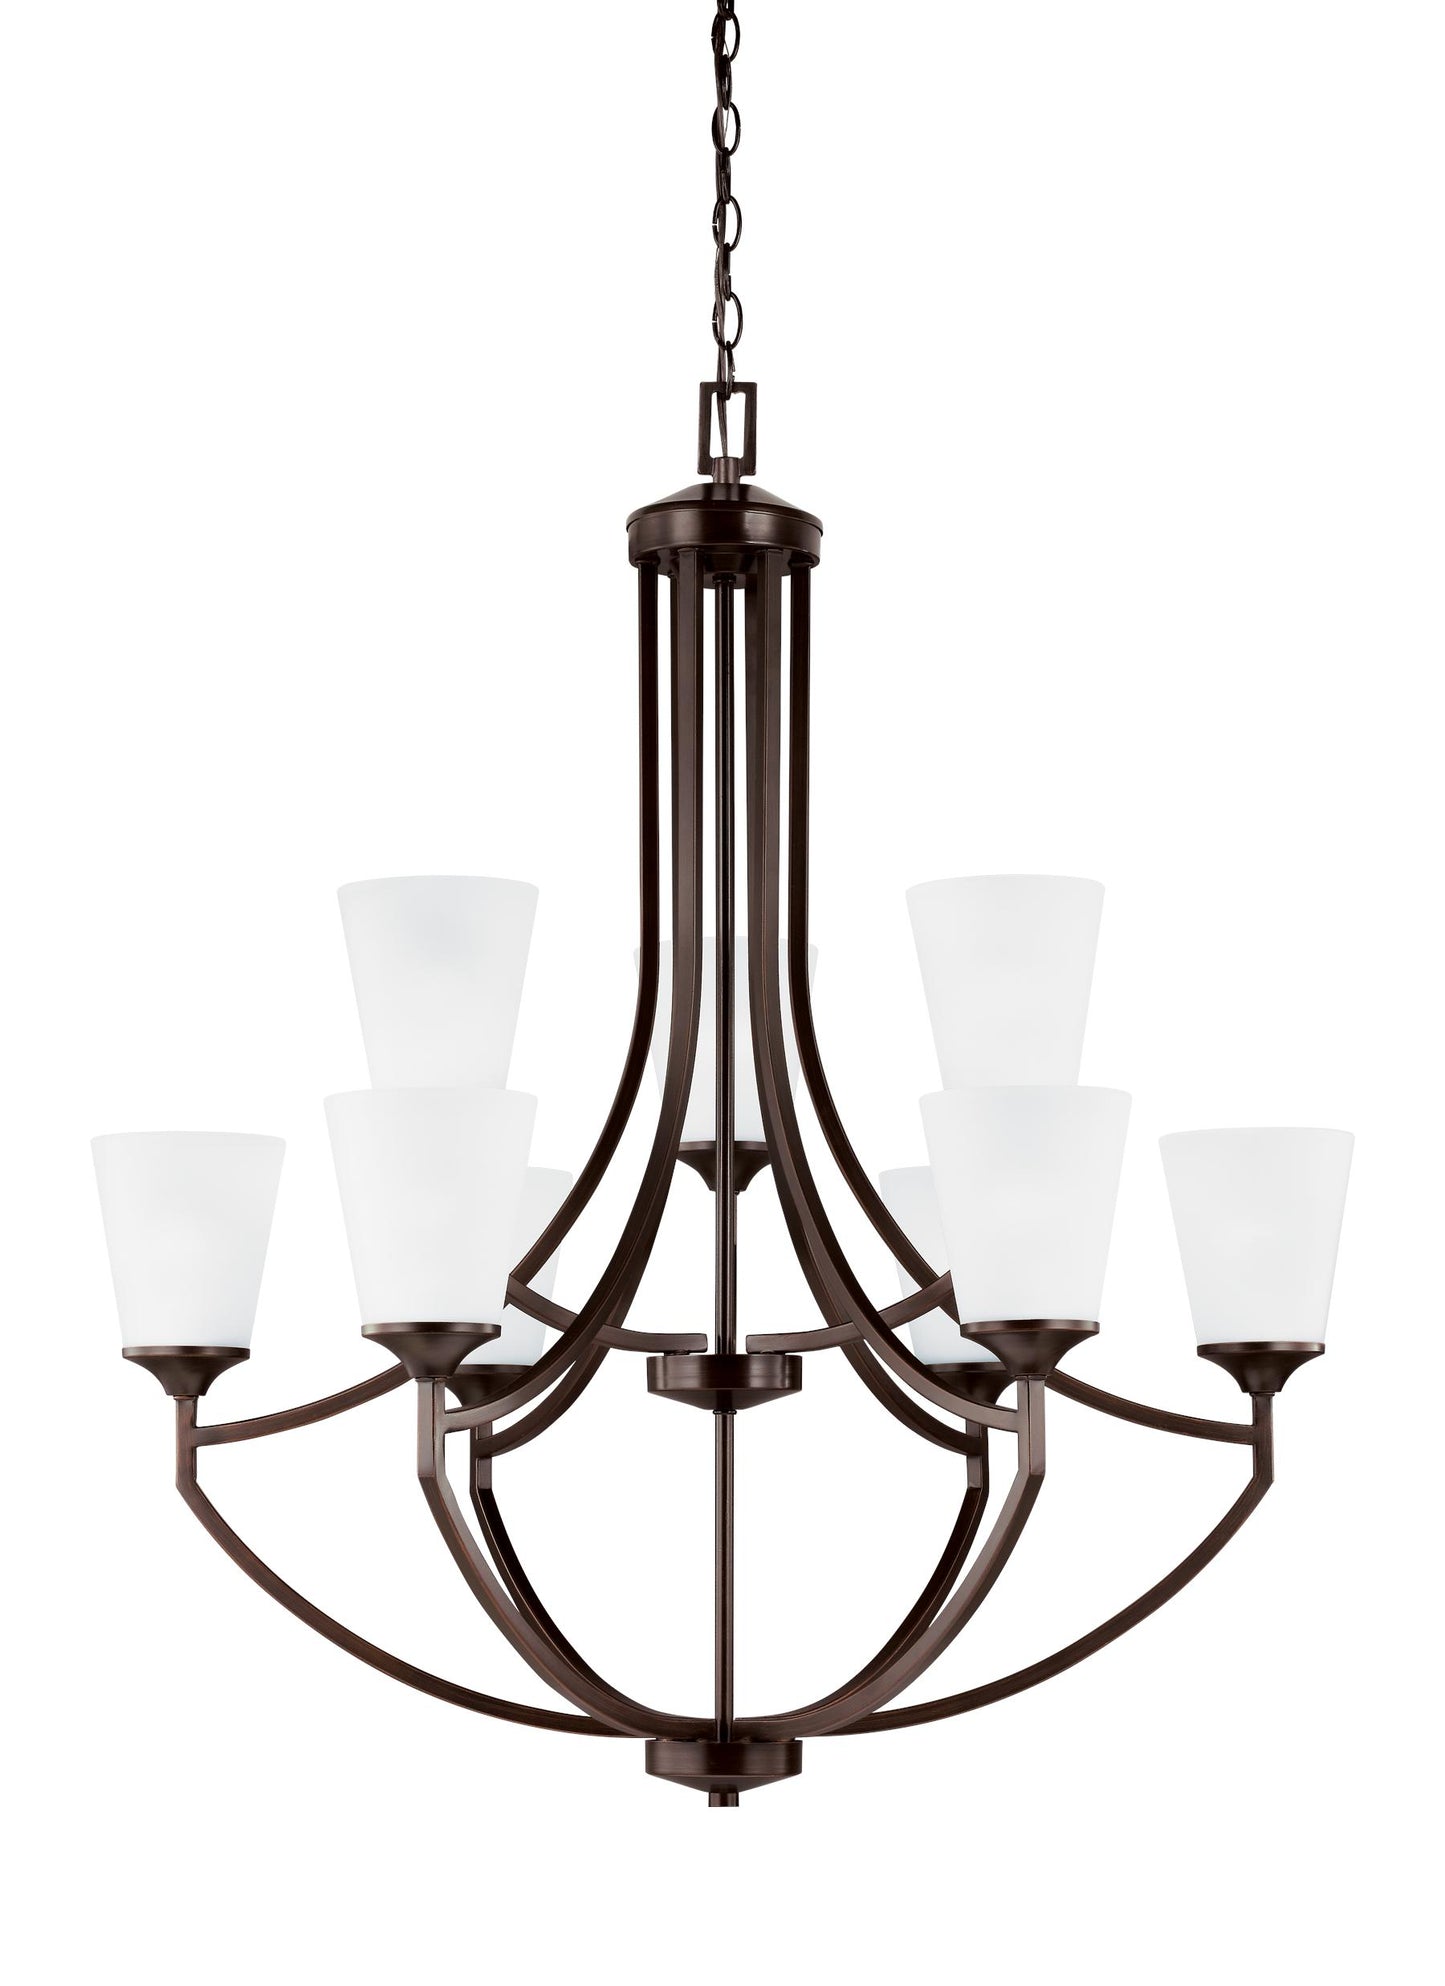 Hanford traditional 9-light indoor dimmable ceiling chandelier pendant light in bronze finish with satin etched glass shades